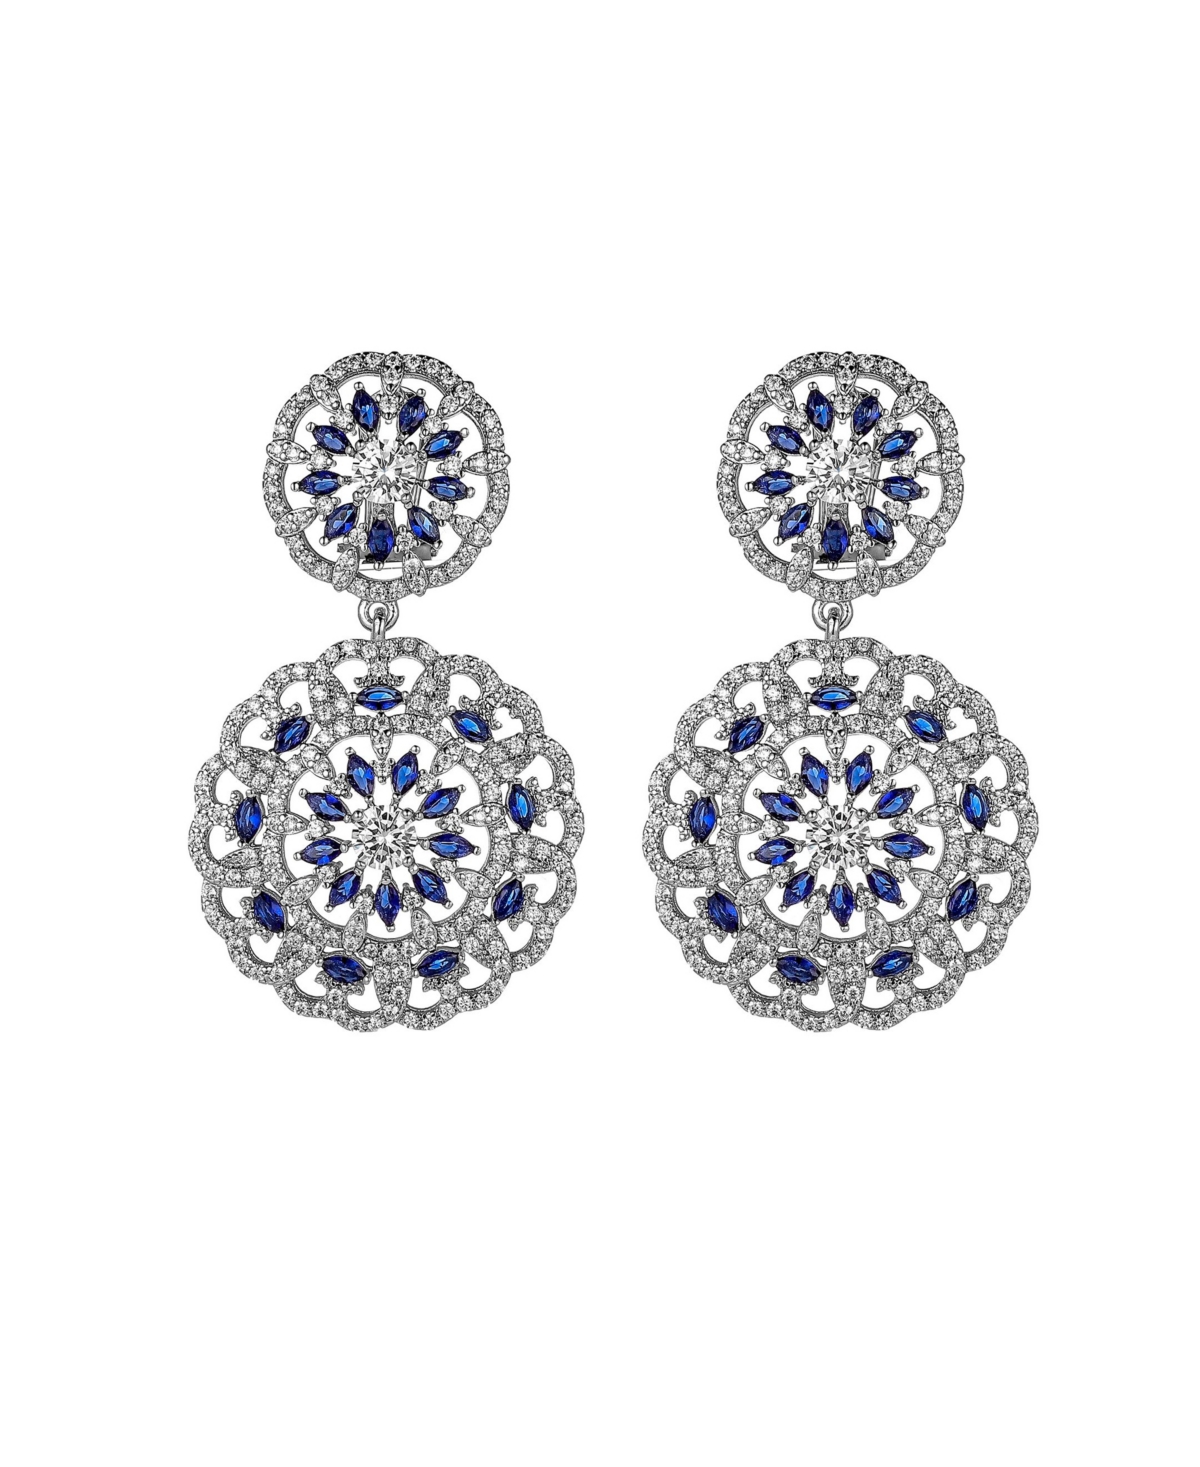 Silver-Tone Sapphire Accent Disc Earrings - Silver-Tone